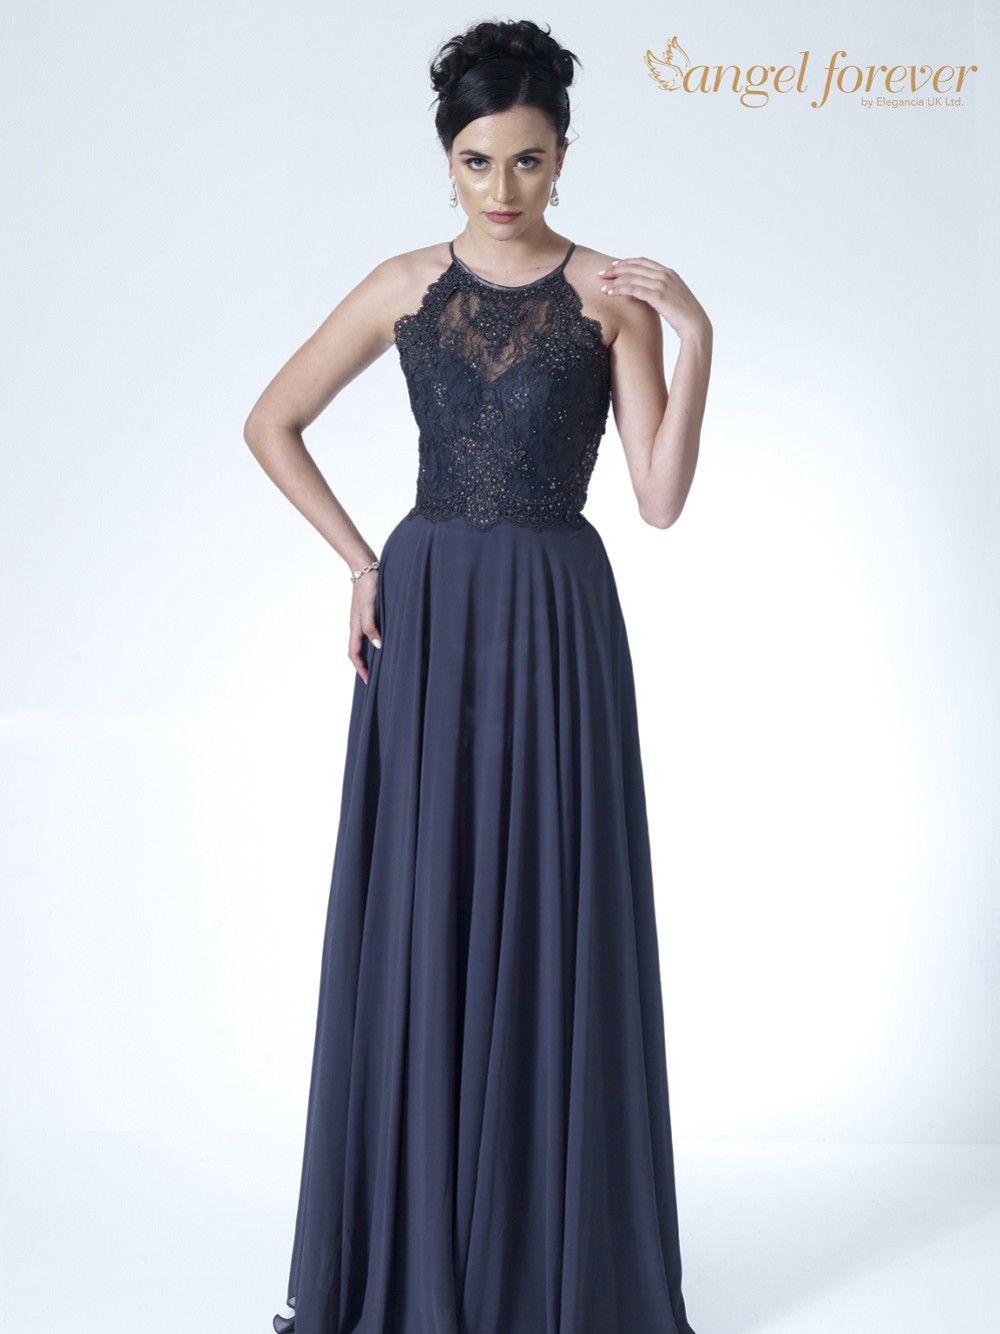 Photograph of Angel Forever High Neck Lace Bodice A Line Chiffon Prom Dress (Charcoal)